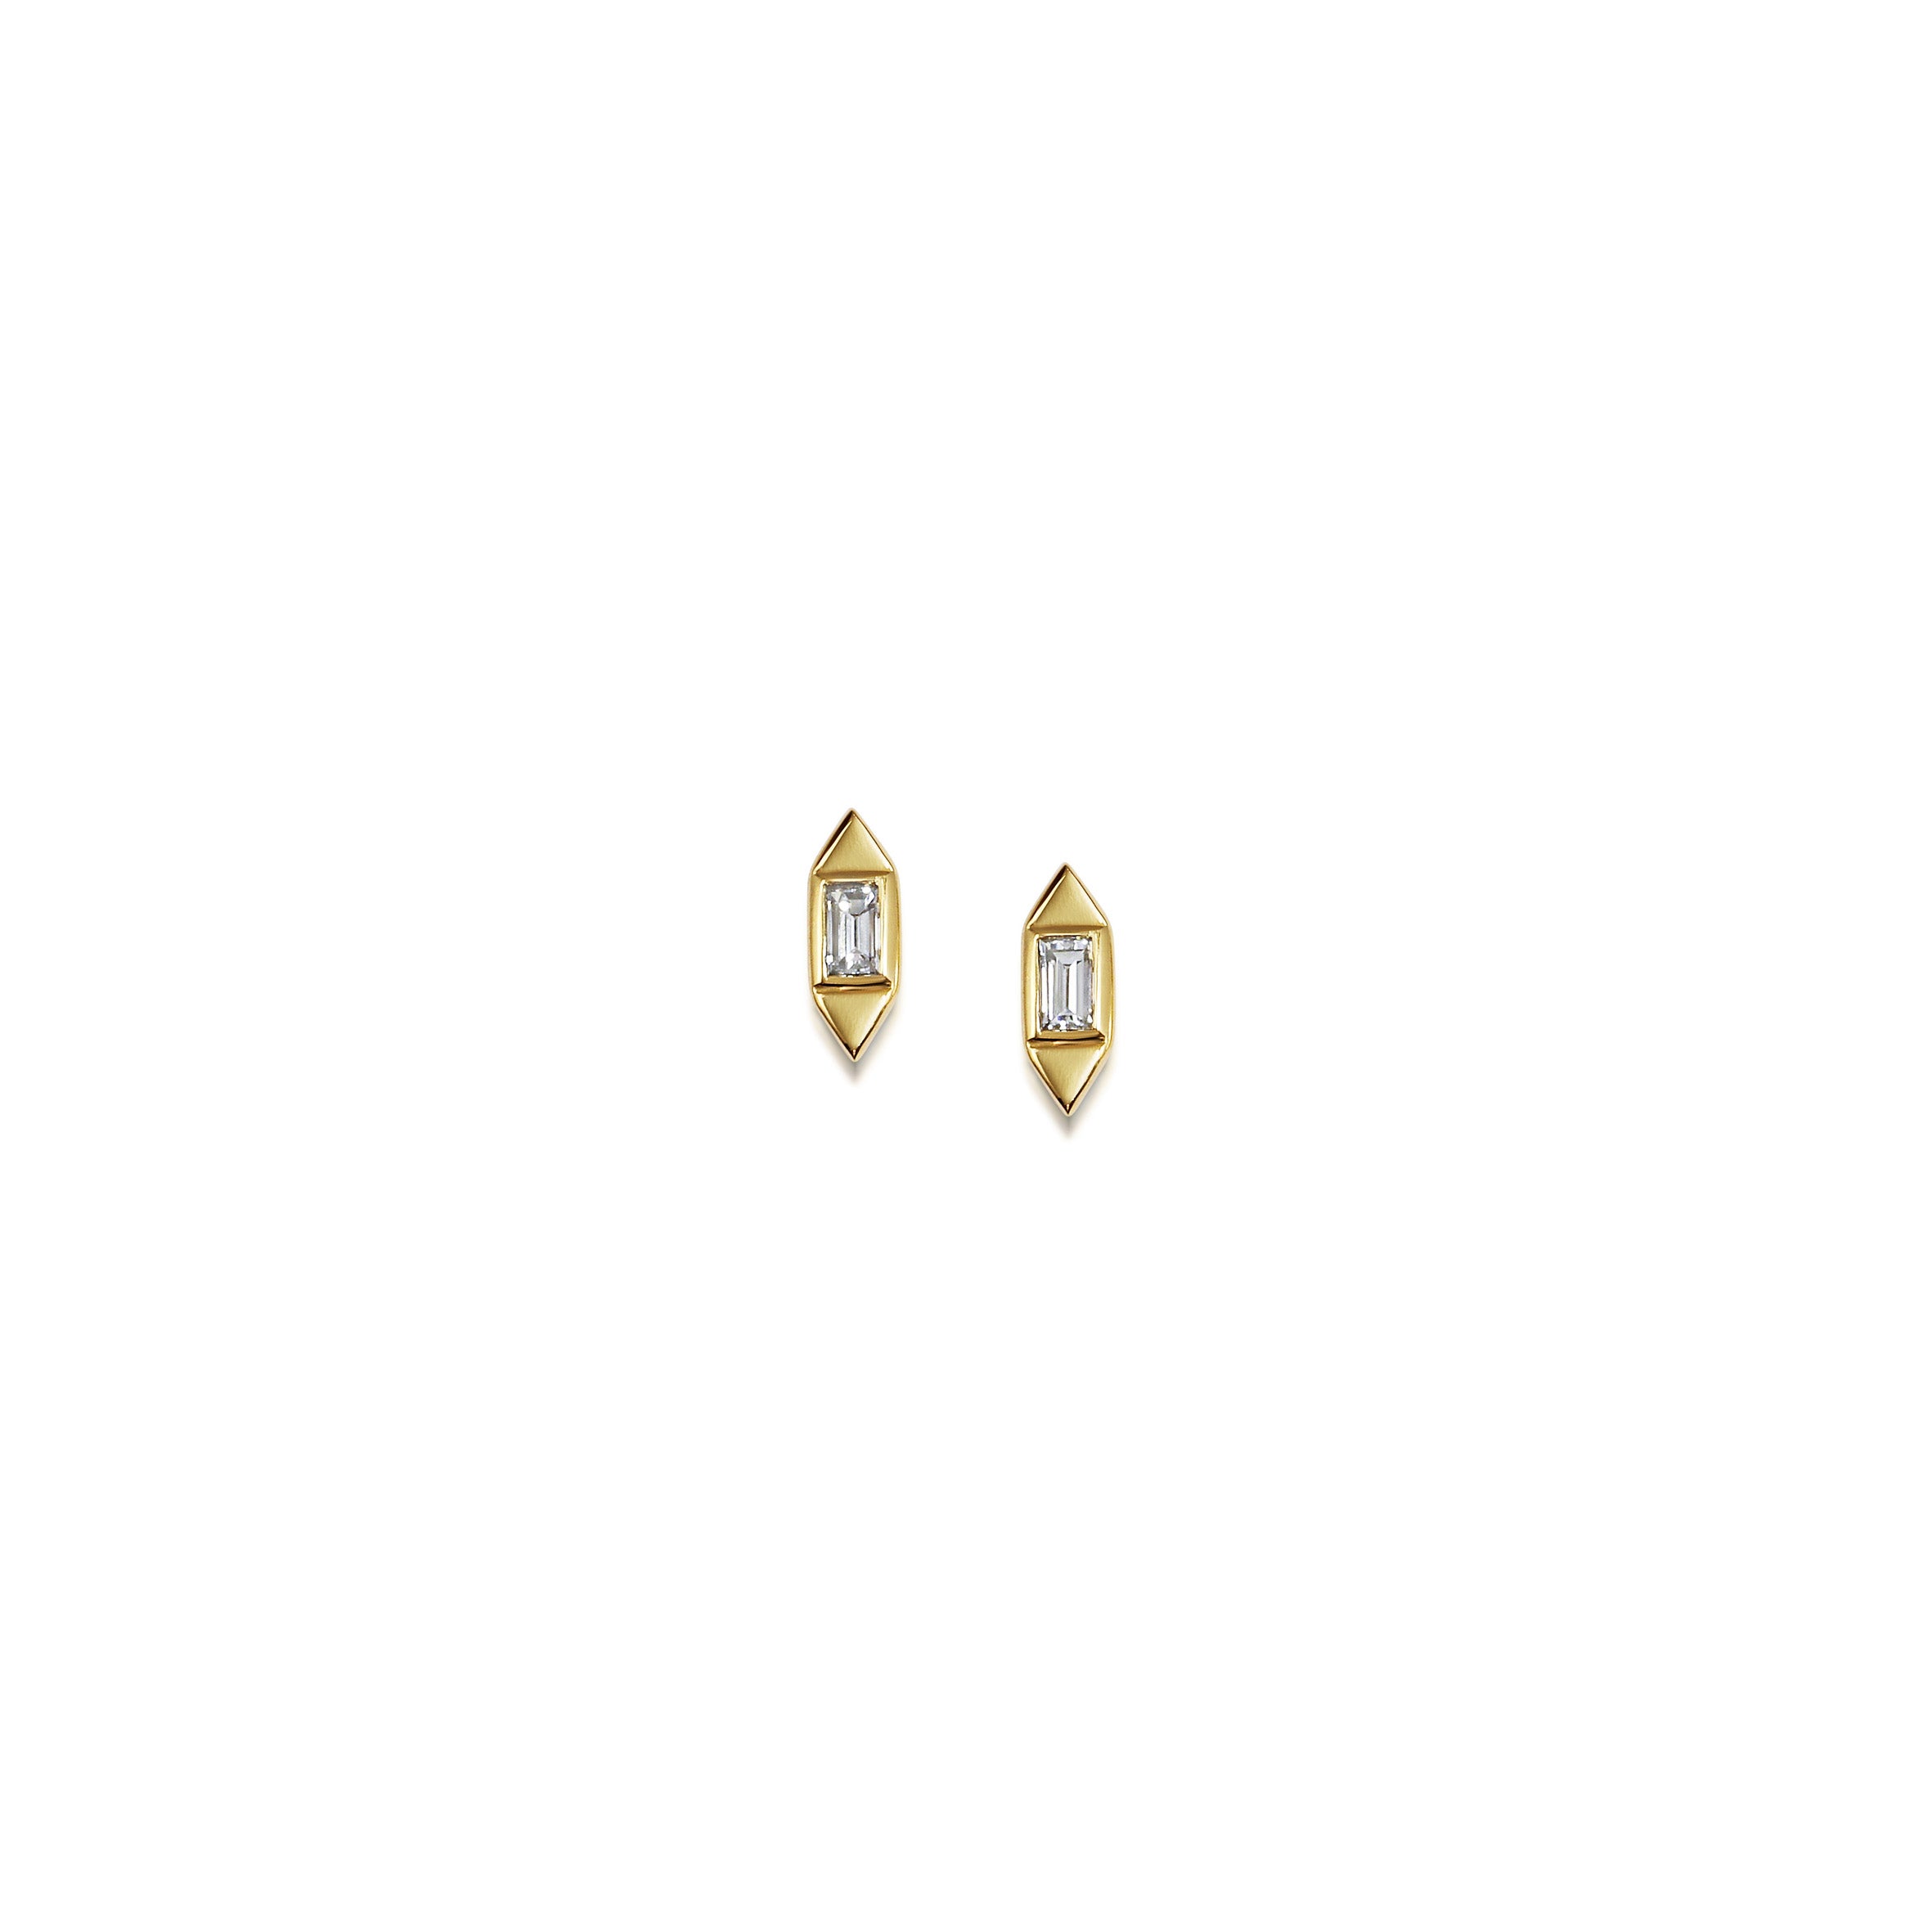 The Single Baguette Deco Earrings by East London jeweller Rachel Boston | Discover our collections of unique and timeless engagement rings, wedding rings, and modern fine jewellery.